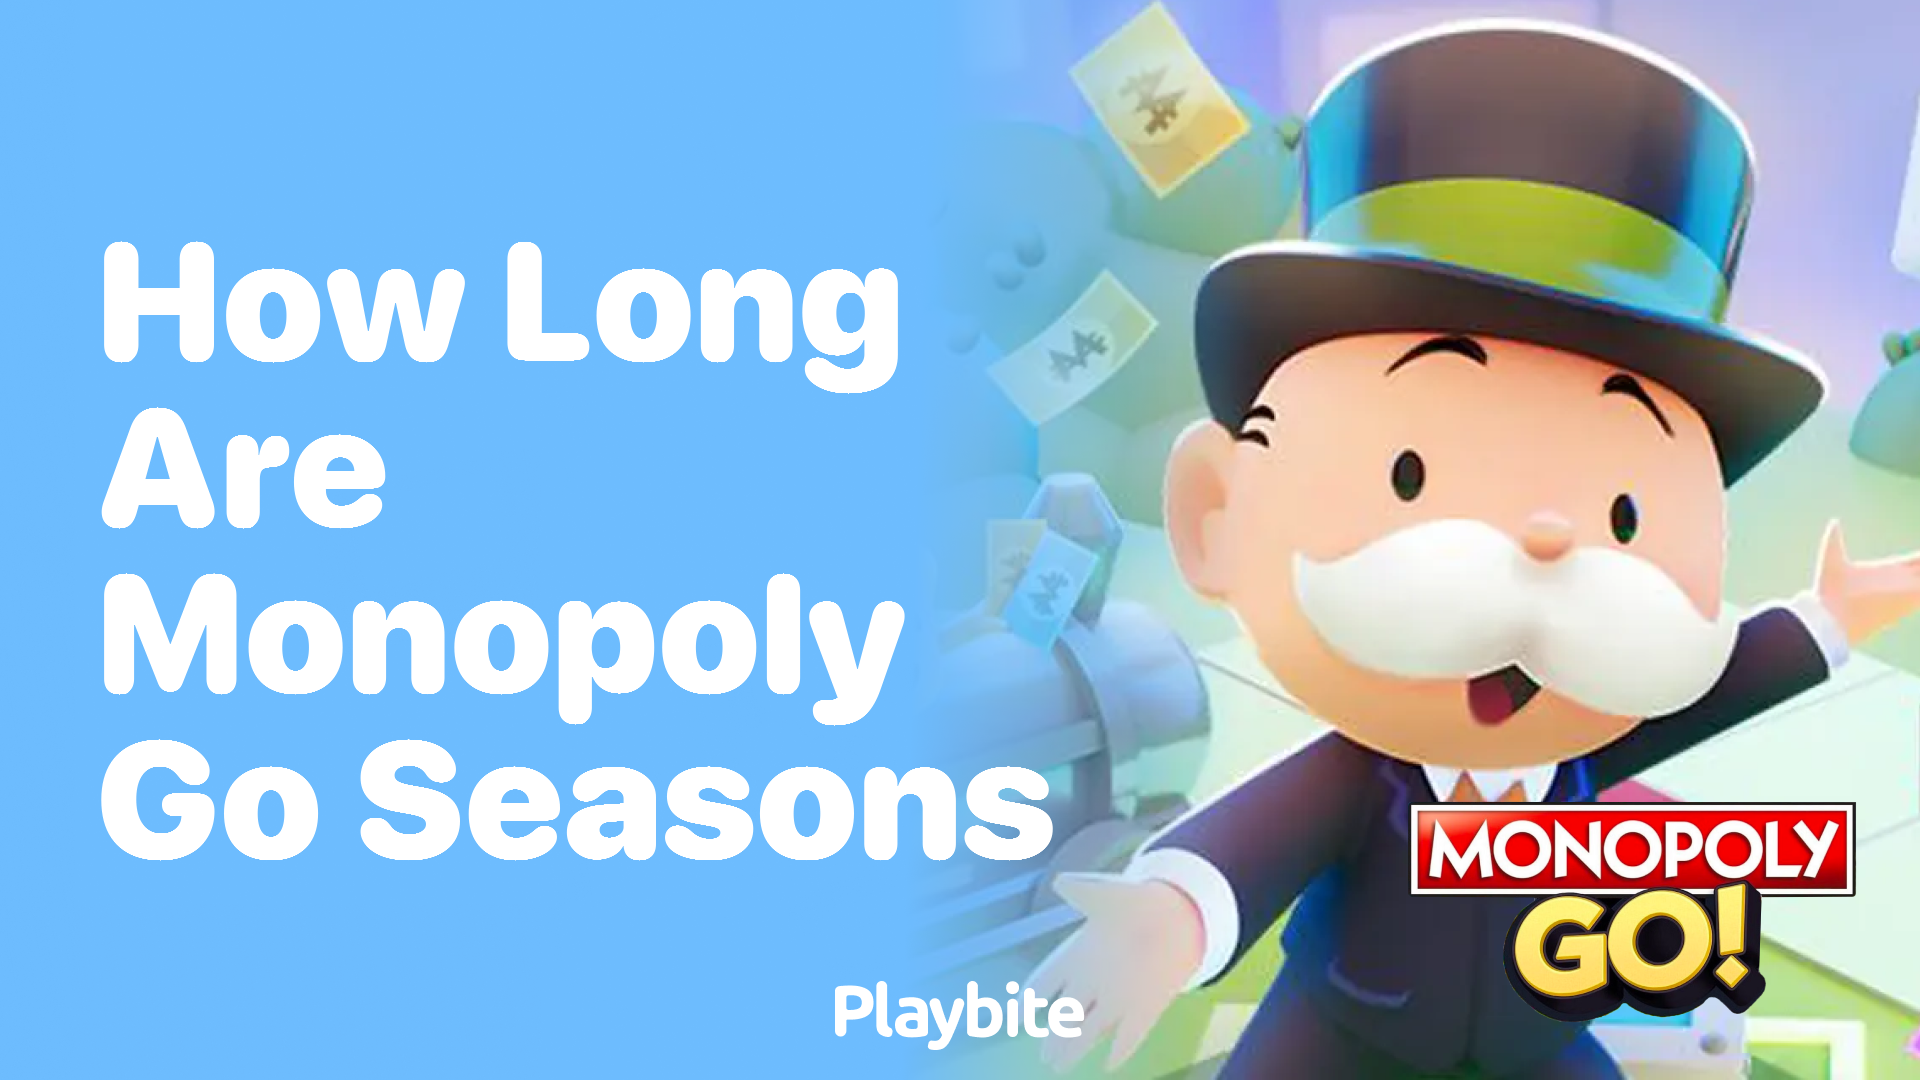 How Long Are Monopoly Go Seasons?